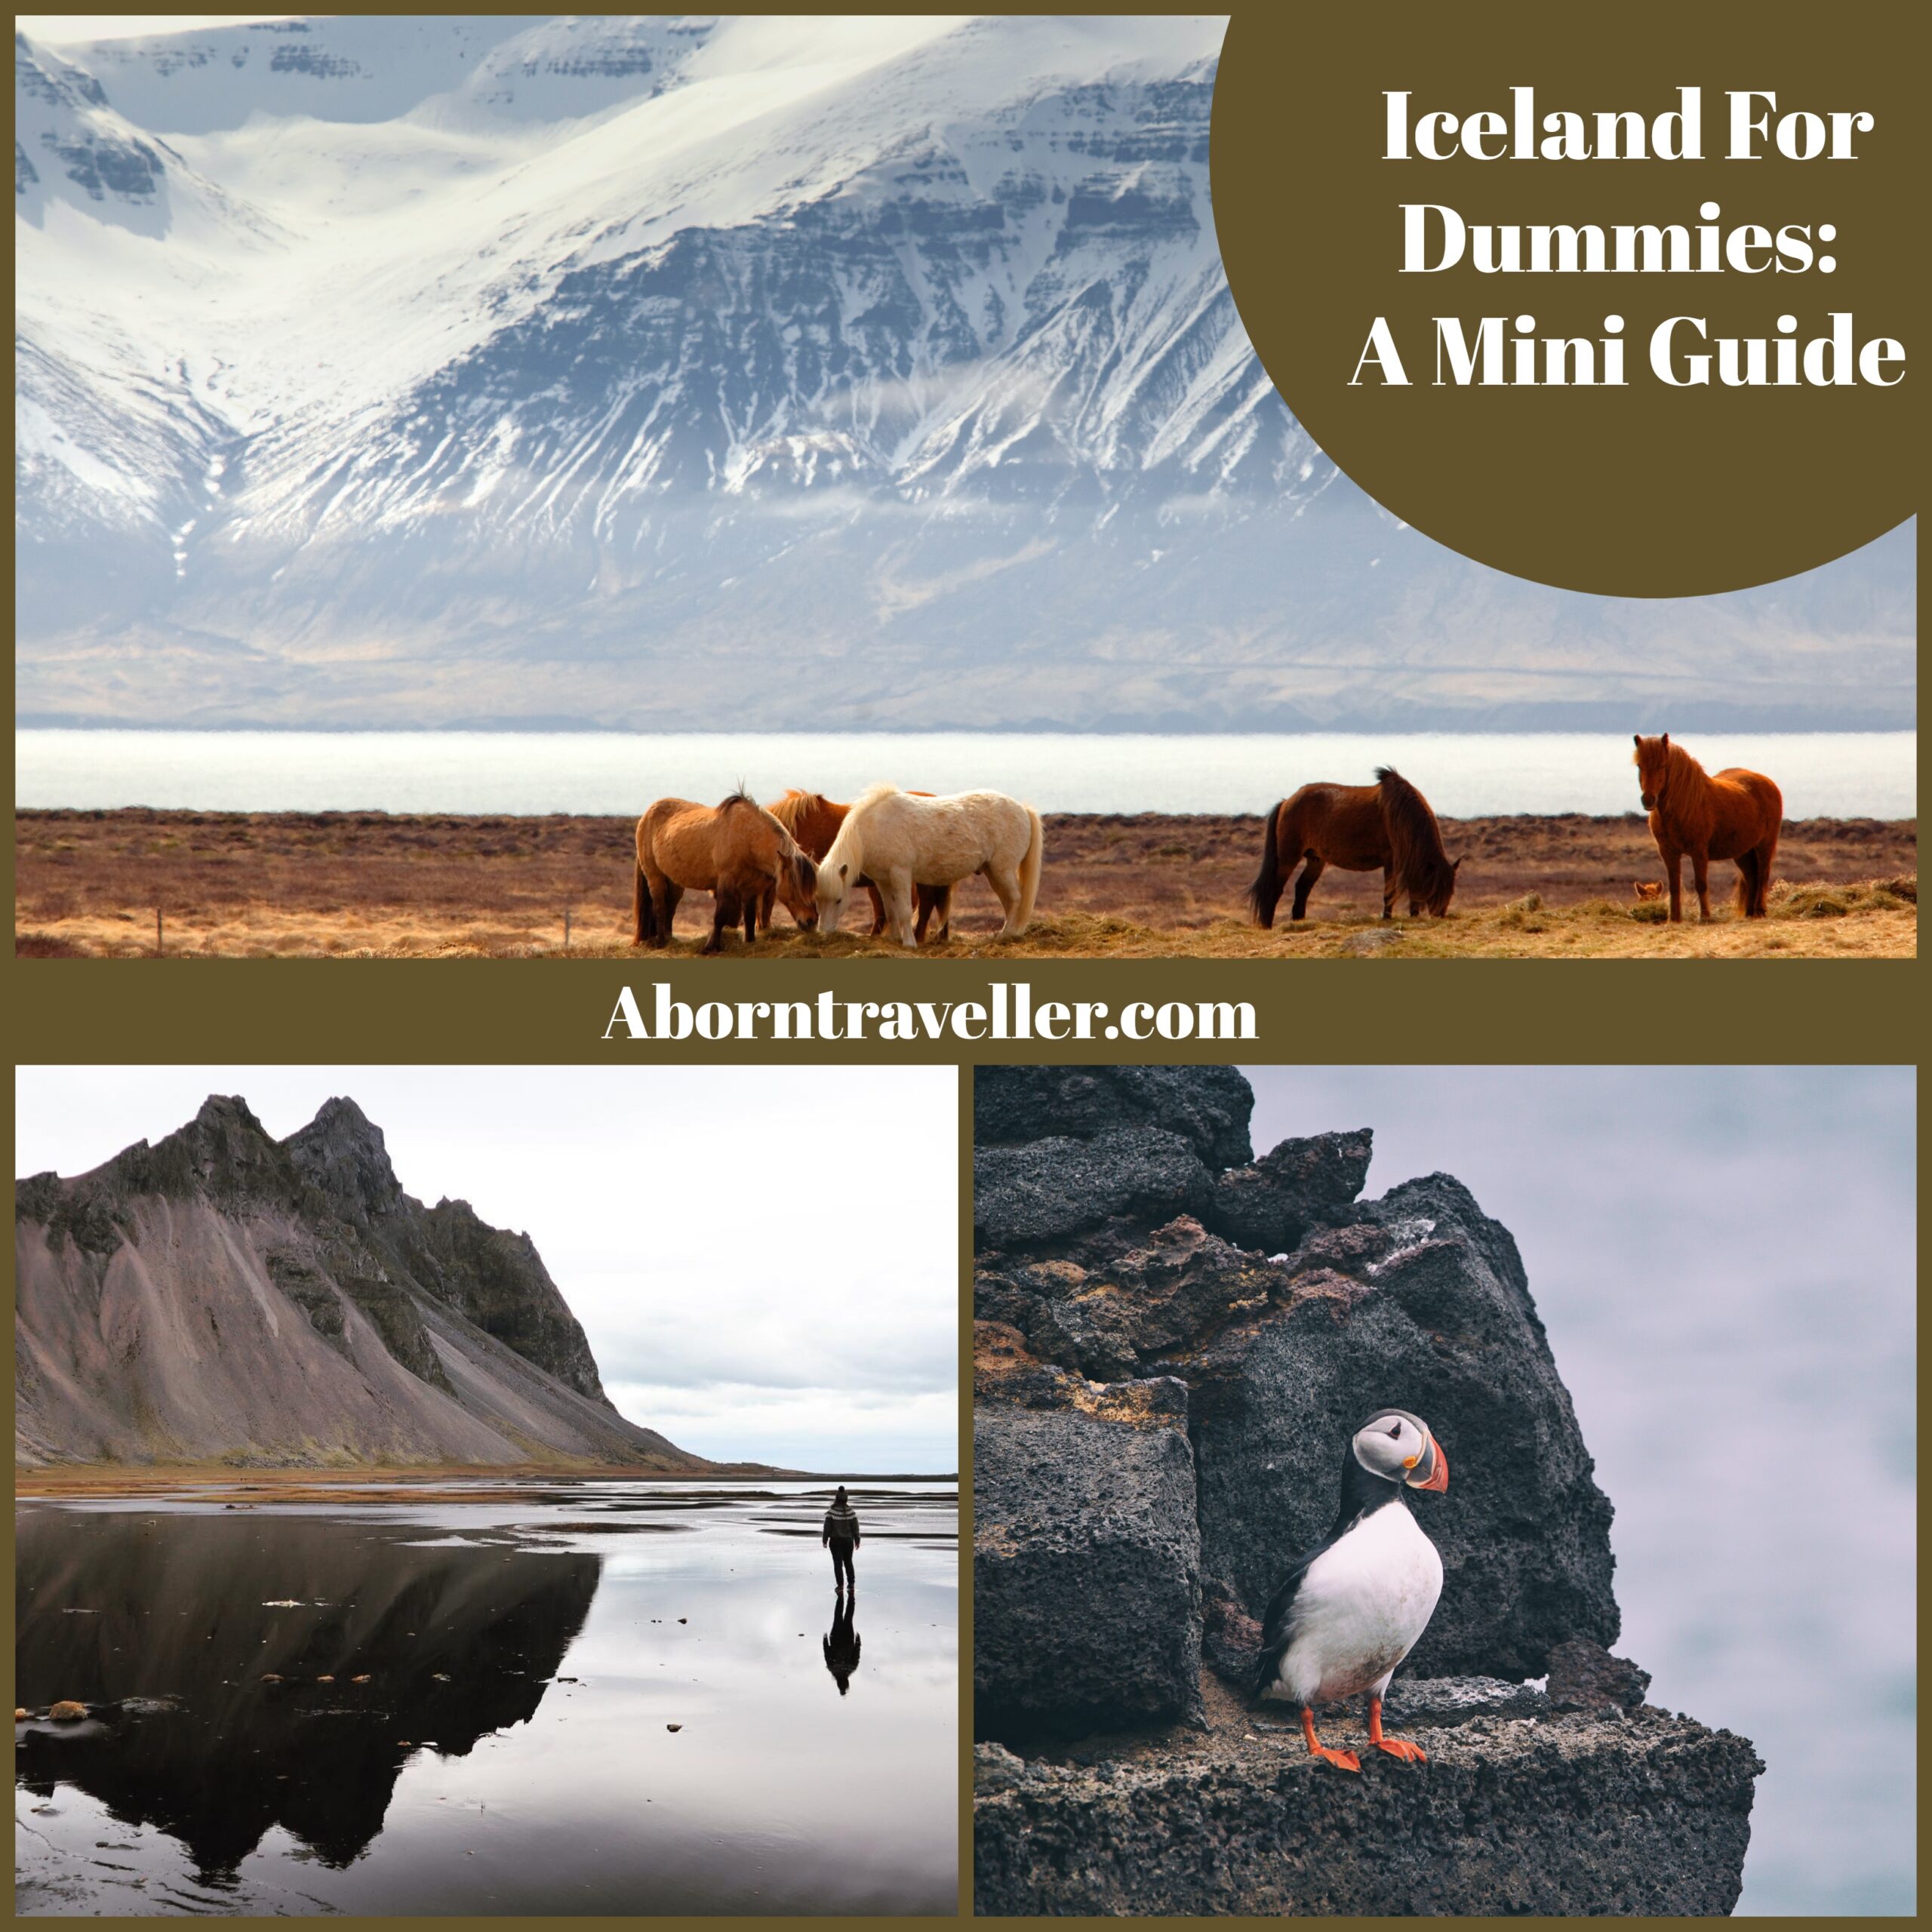 Iceland for Dummies - A mini guide (3)